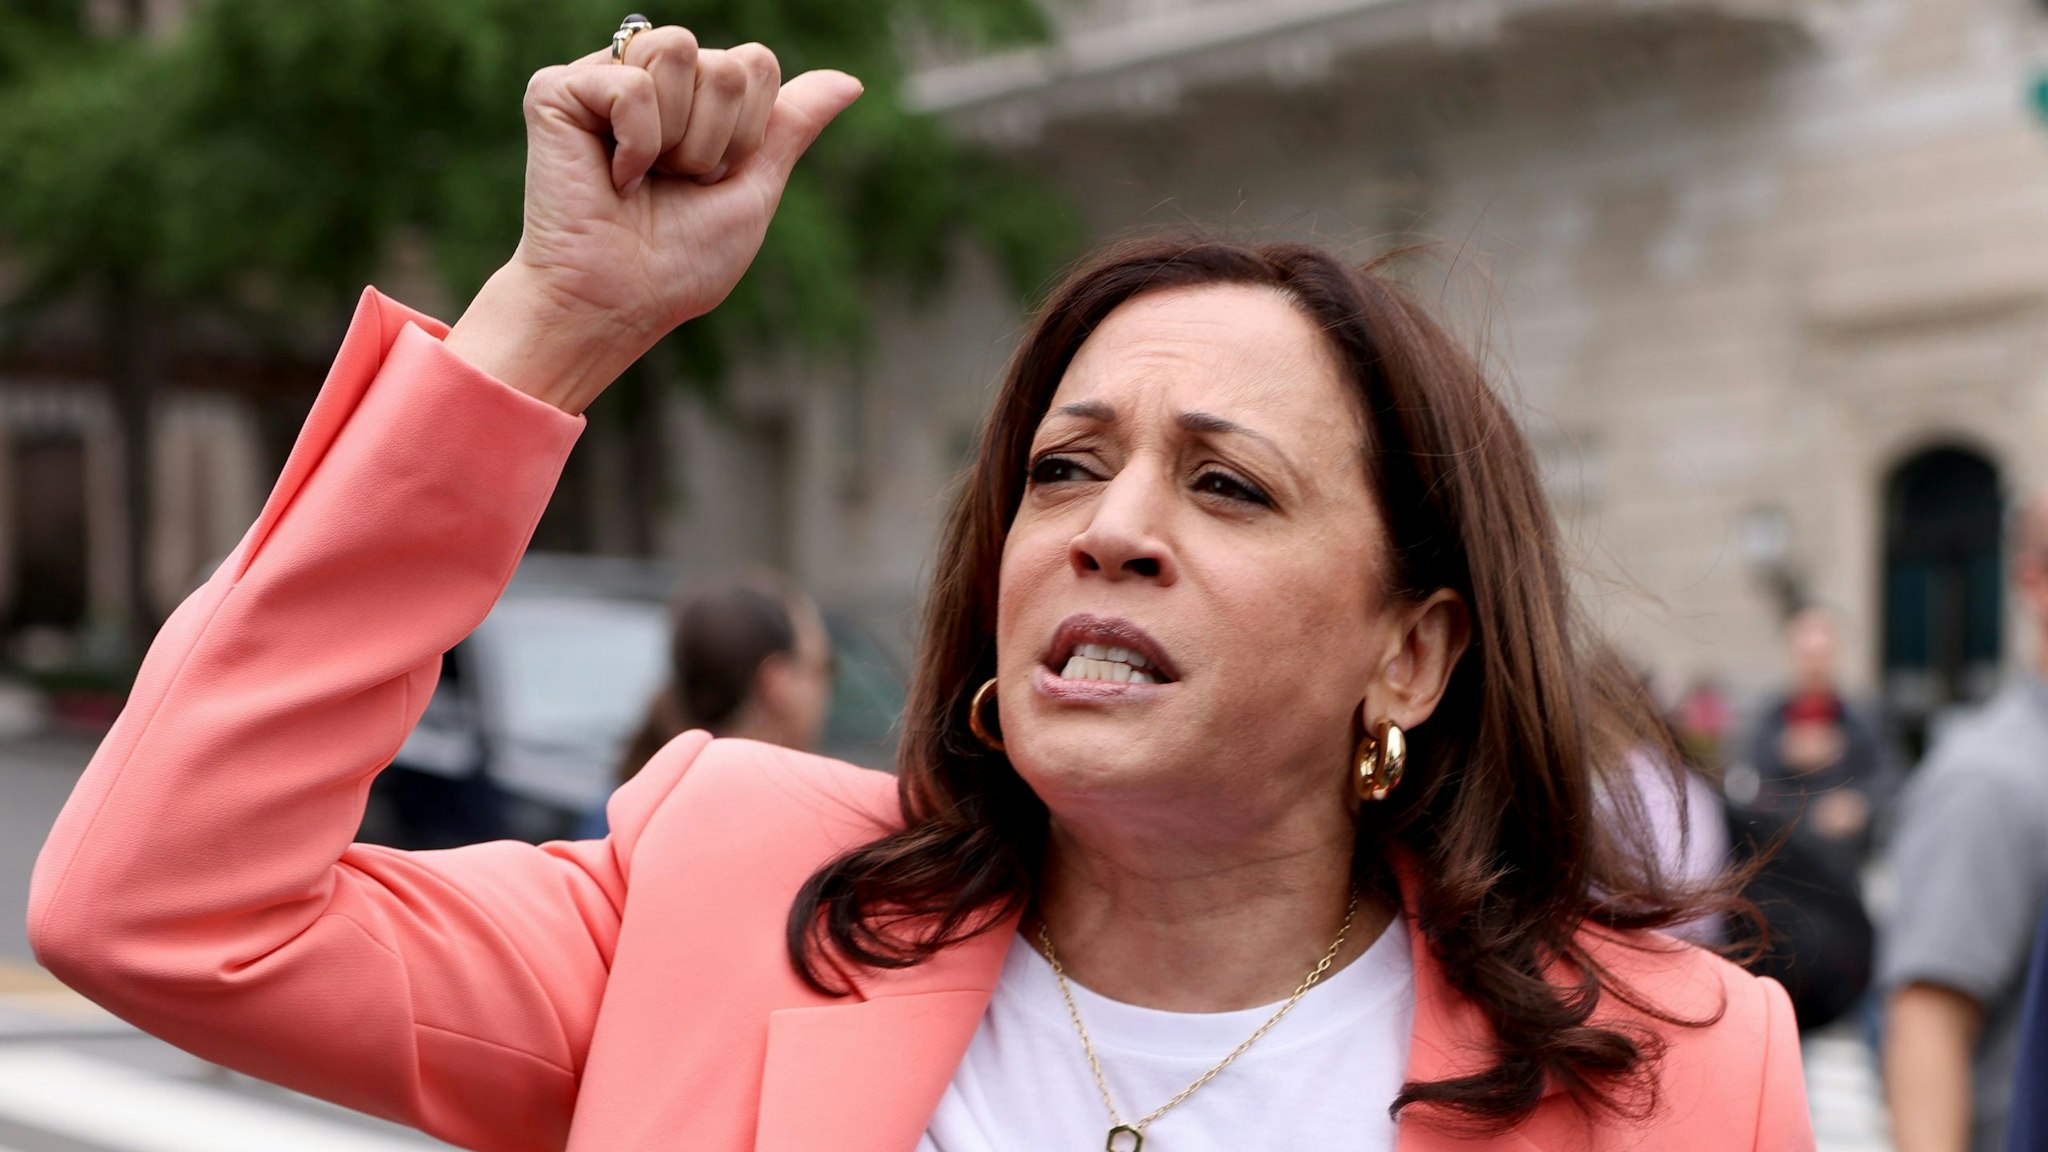 WASHINGTON, DC - JUNE 12: U.S. Vice President Kamala Harris speaks to marchers, as her husband Doug Emhoff looks on, during the Capitol Pride Parade on June 12, 2021 in Washington, DC. Capital Pride returned to Washington DC, after being canceled last year due to the Covid-19 pandemic.